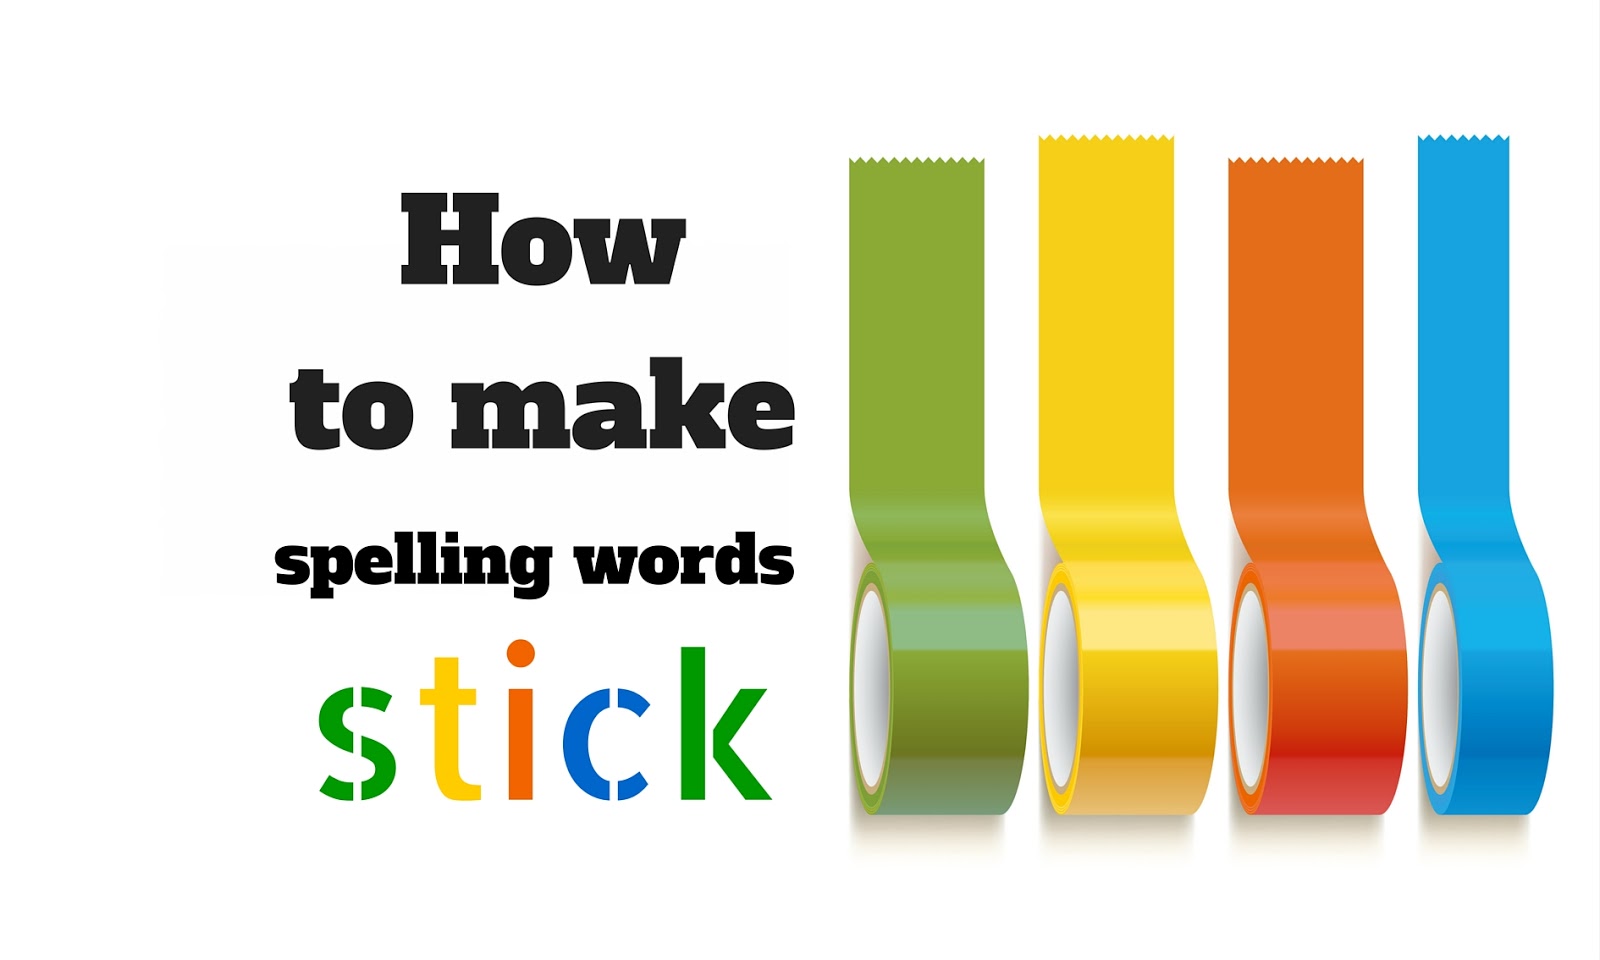 Стик текст. Stick Word. How to Spell Words. Spelling Words. Английское слово Stick.